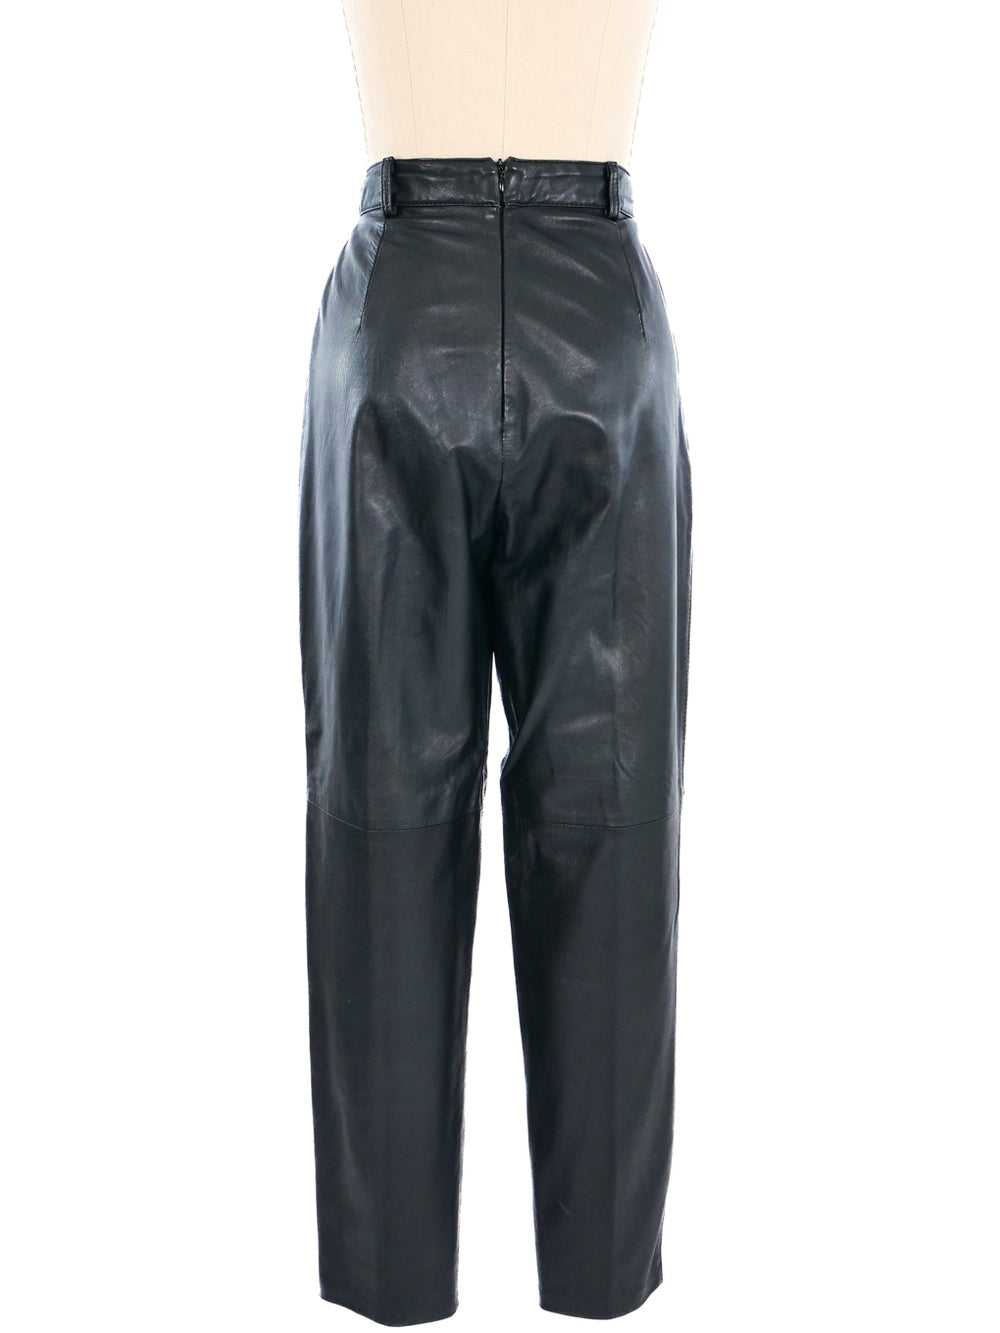 Versus By Gianni Versace Leather Trousers - image 3